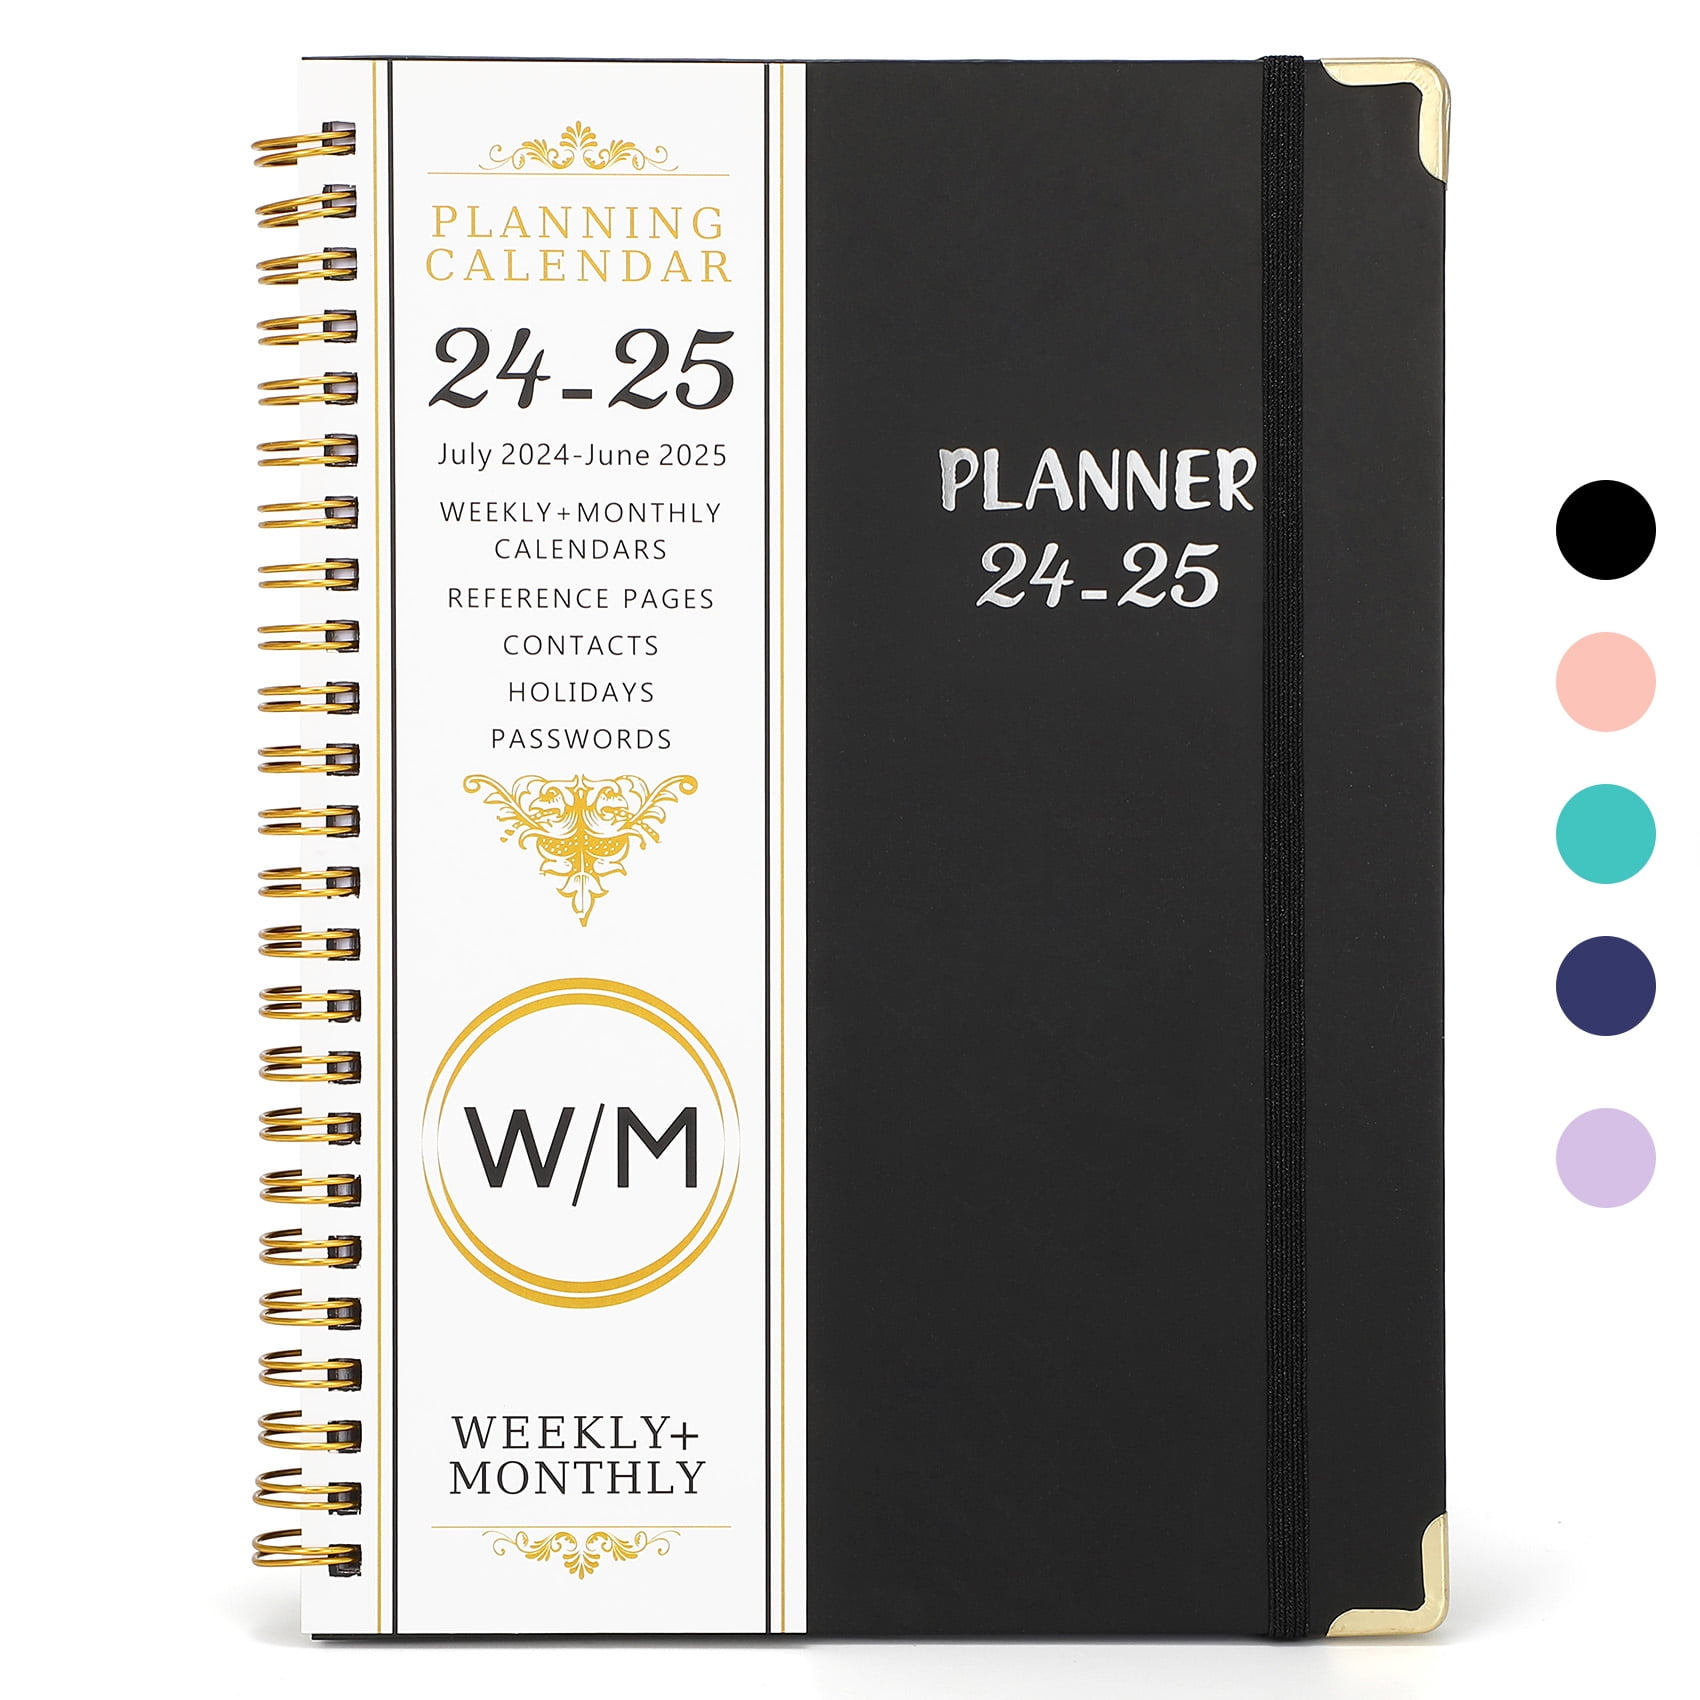 2024-2025 Academic Year Planner Calendar Notebook（Jul.2024-Jun.2025,6.3&Amp;Amp;Quot;X8.5&Amp;Amp;Quot;)，Daily Weekly Monthly Agenda Planner For School Teacher Student | Weekly/Monthly Planning Calendar July 2024 - June 2025